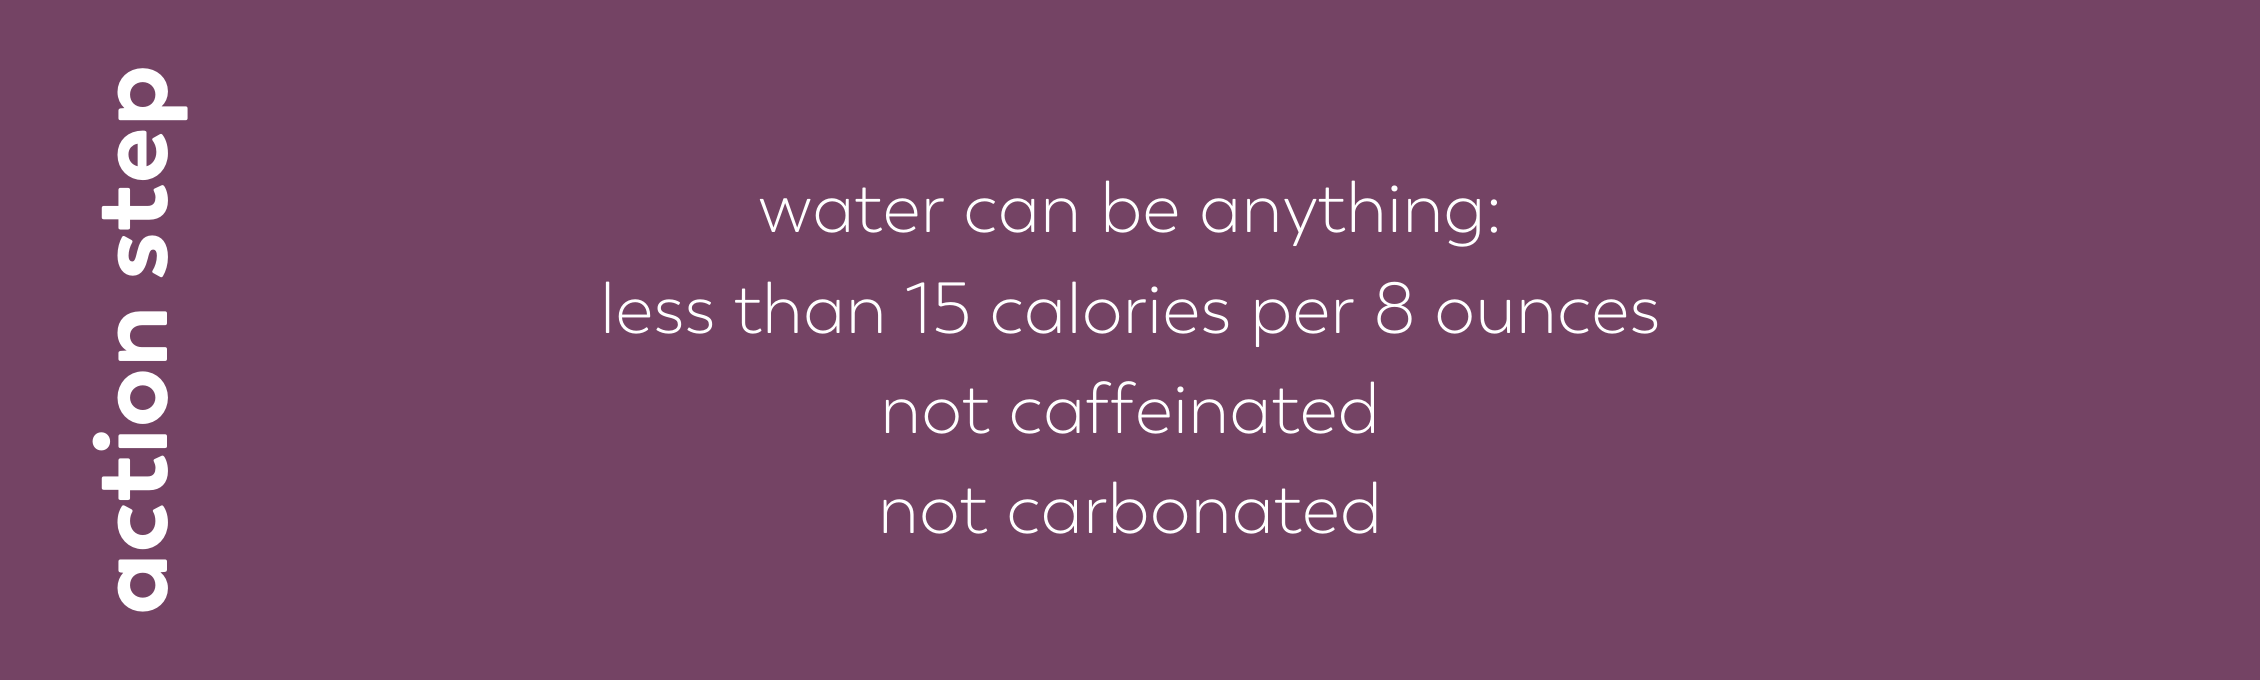 blog quote what counts as water for drinking challenge bariatric food coach